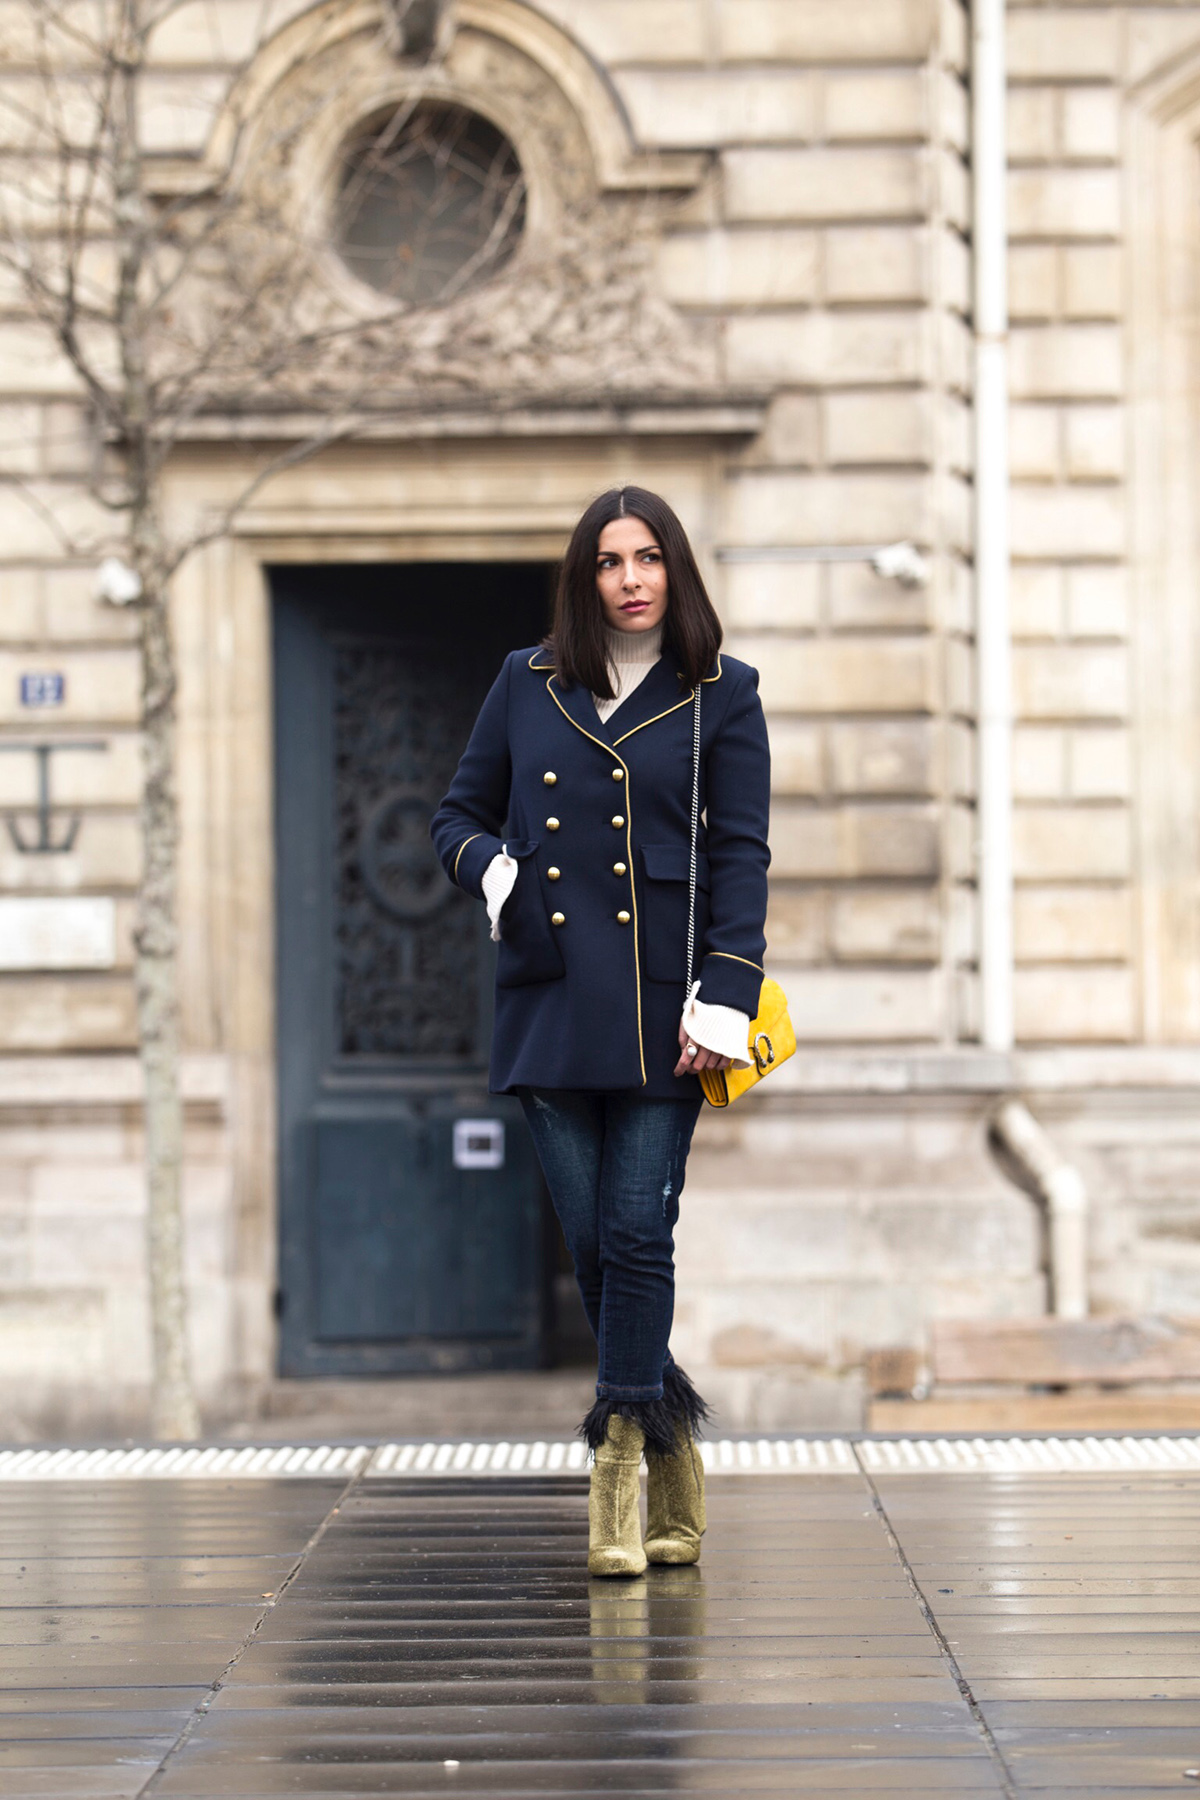 Paris street style with military coat by Fashion & Lifestyle blogger Stella Asteria